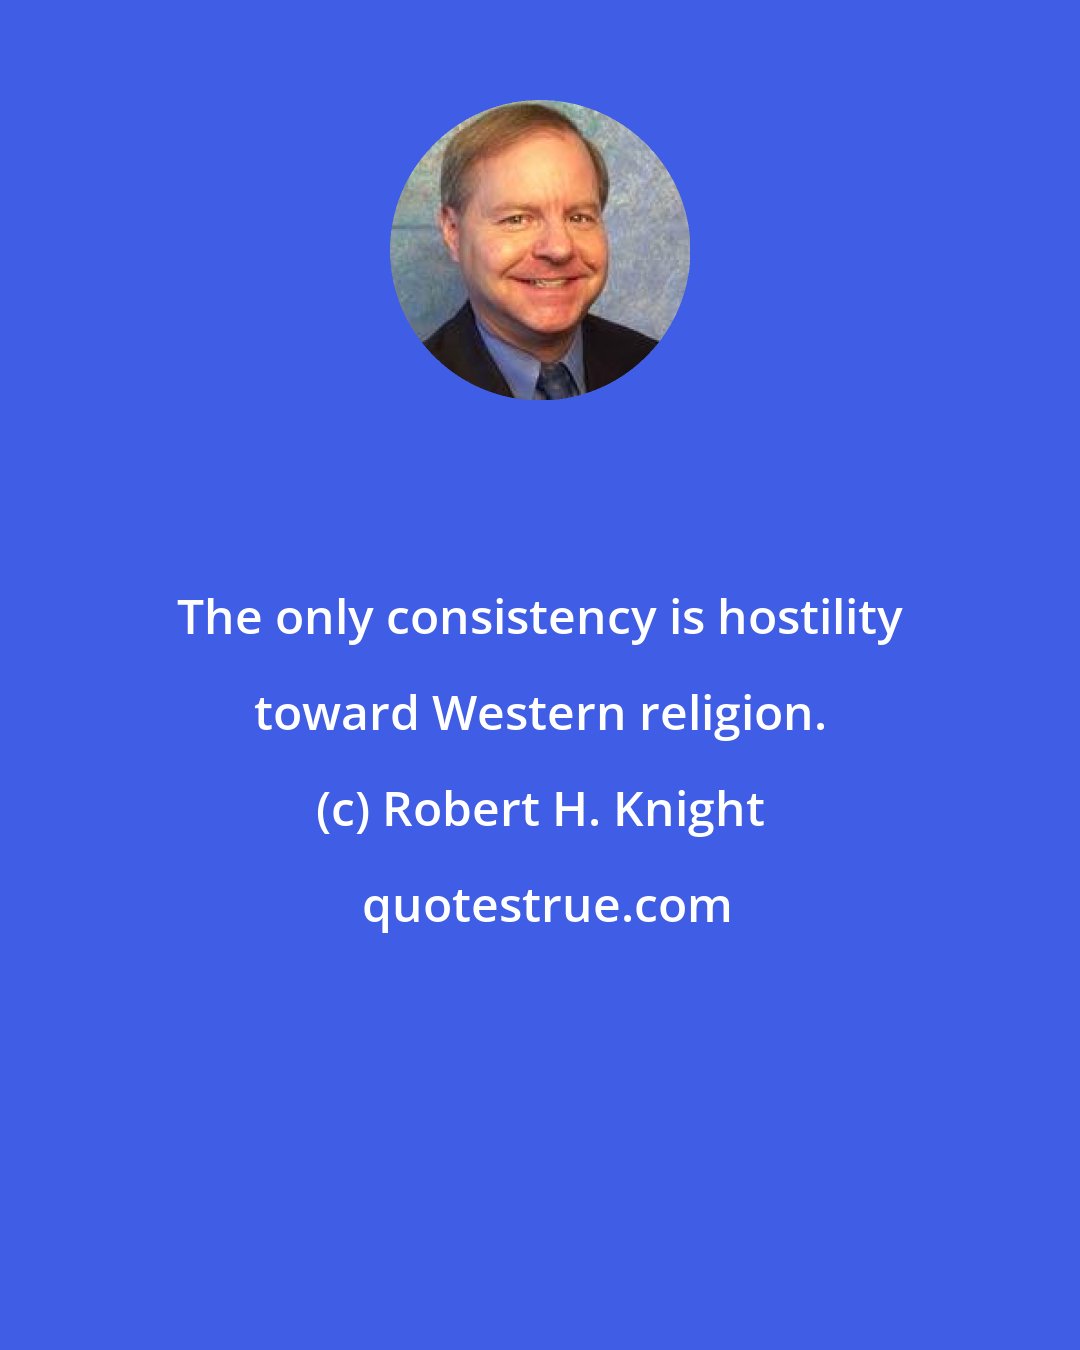 Robert H. Knight: The only consistency is hostility toward Western religion.